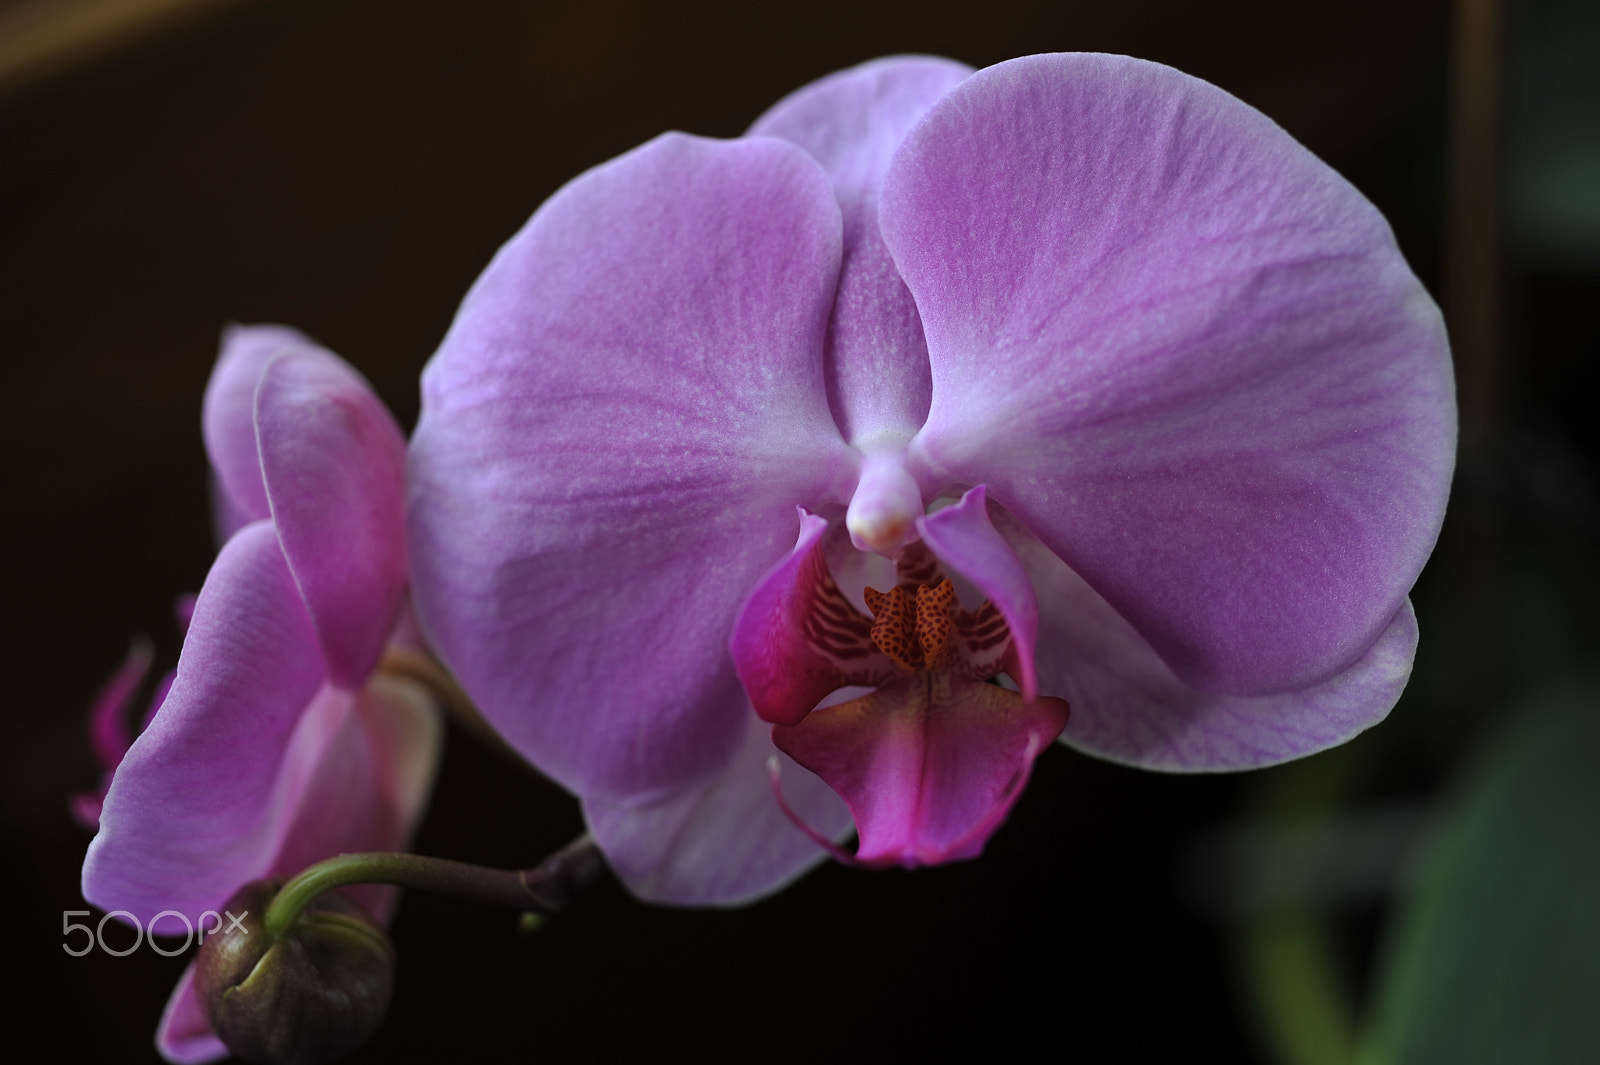 AF Micro-Nikkor 55mm f/2.8 sample photo. Orchid photography